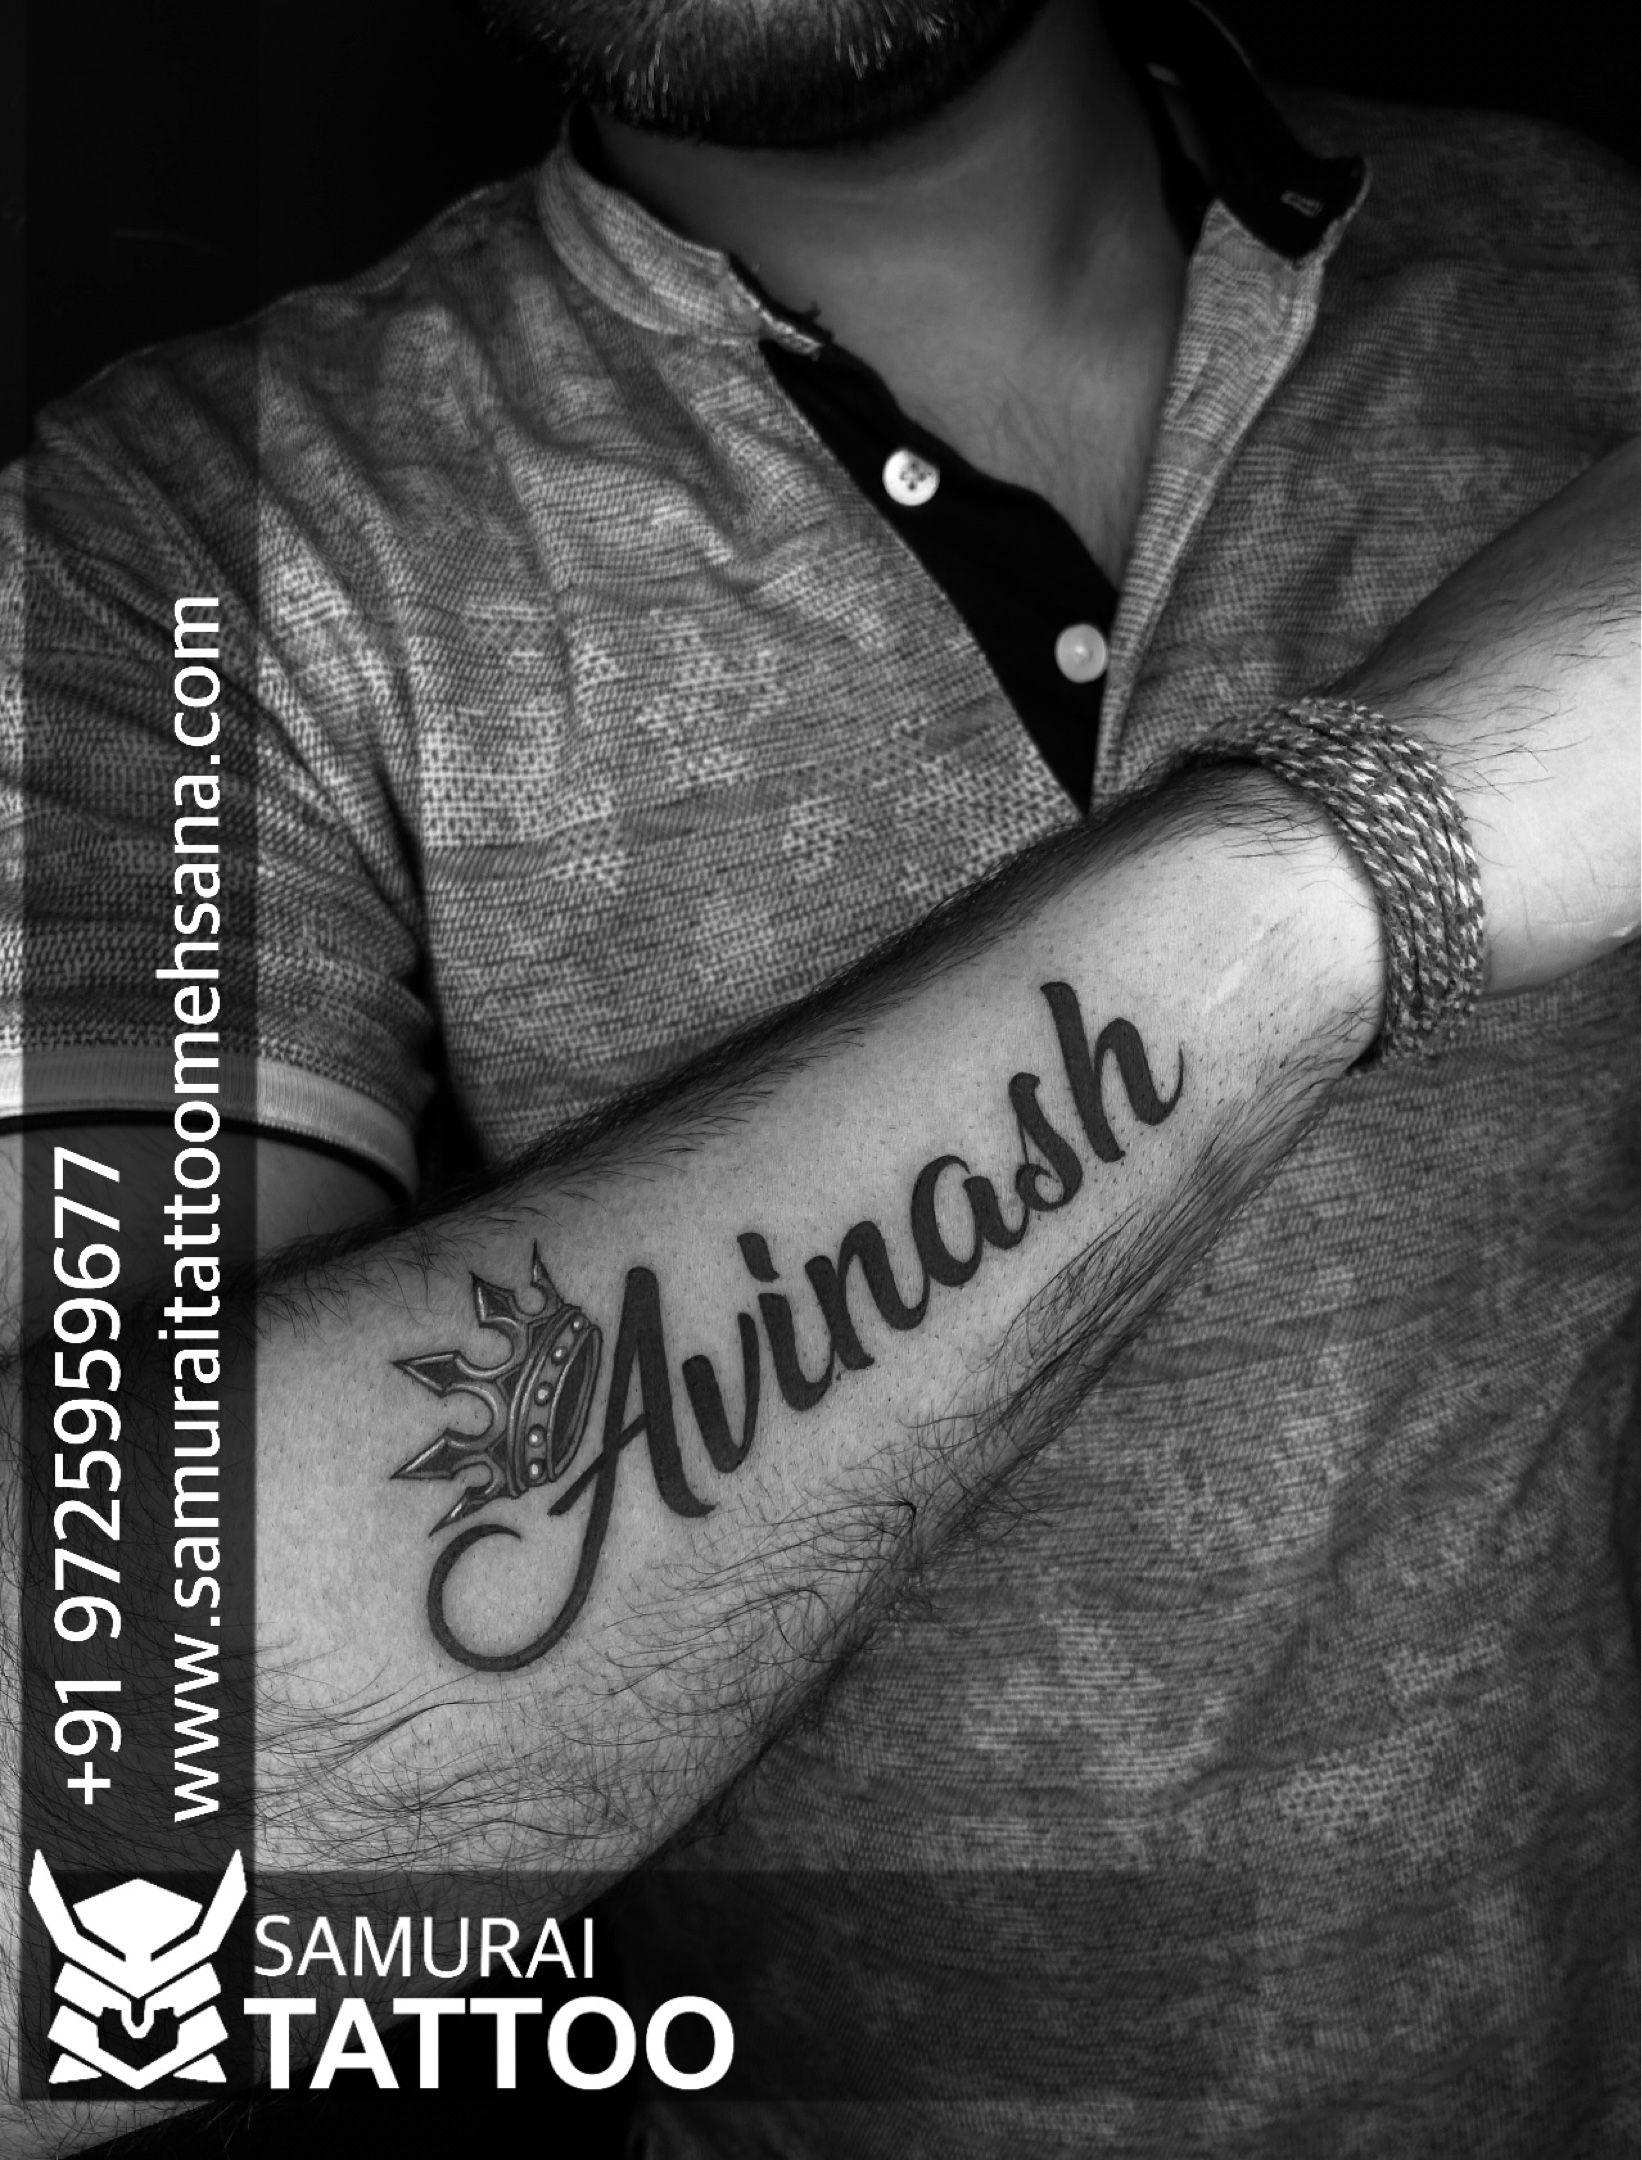 Mayur name Tattoo Contact : 9826269944 | Instagram